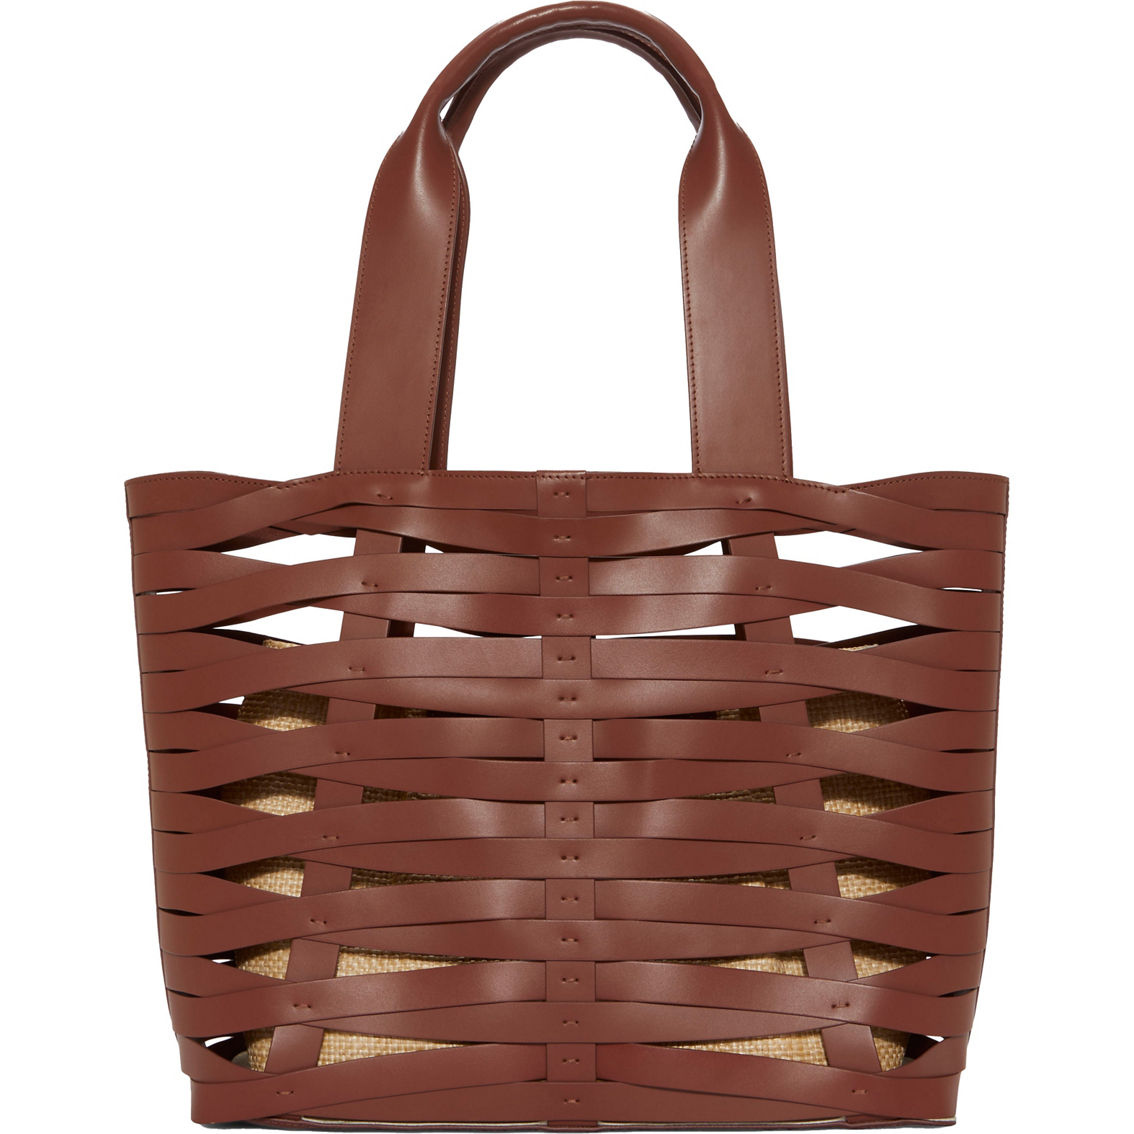 Vince Camuto Cecil Tote, Saddle - Image 2 of 6